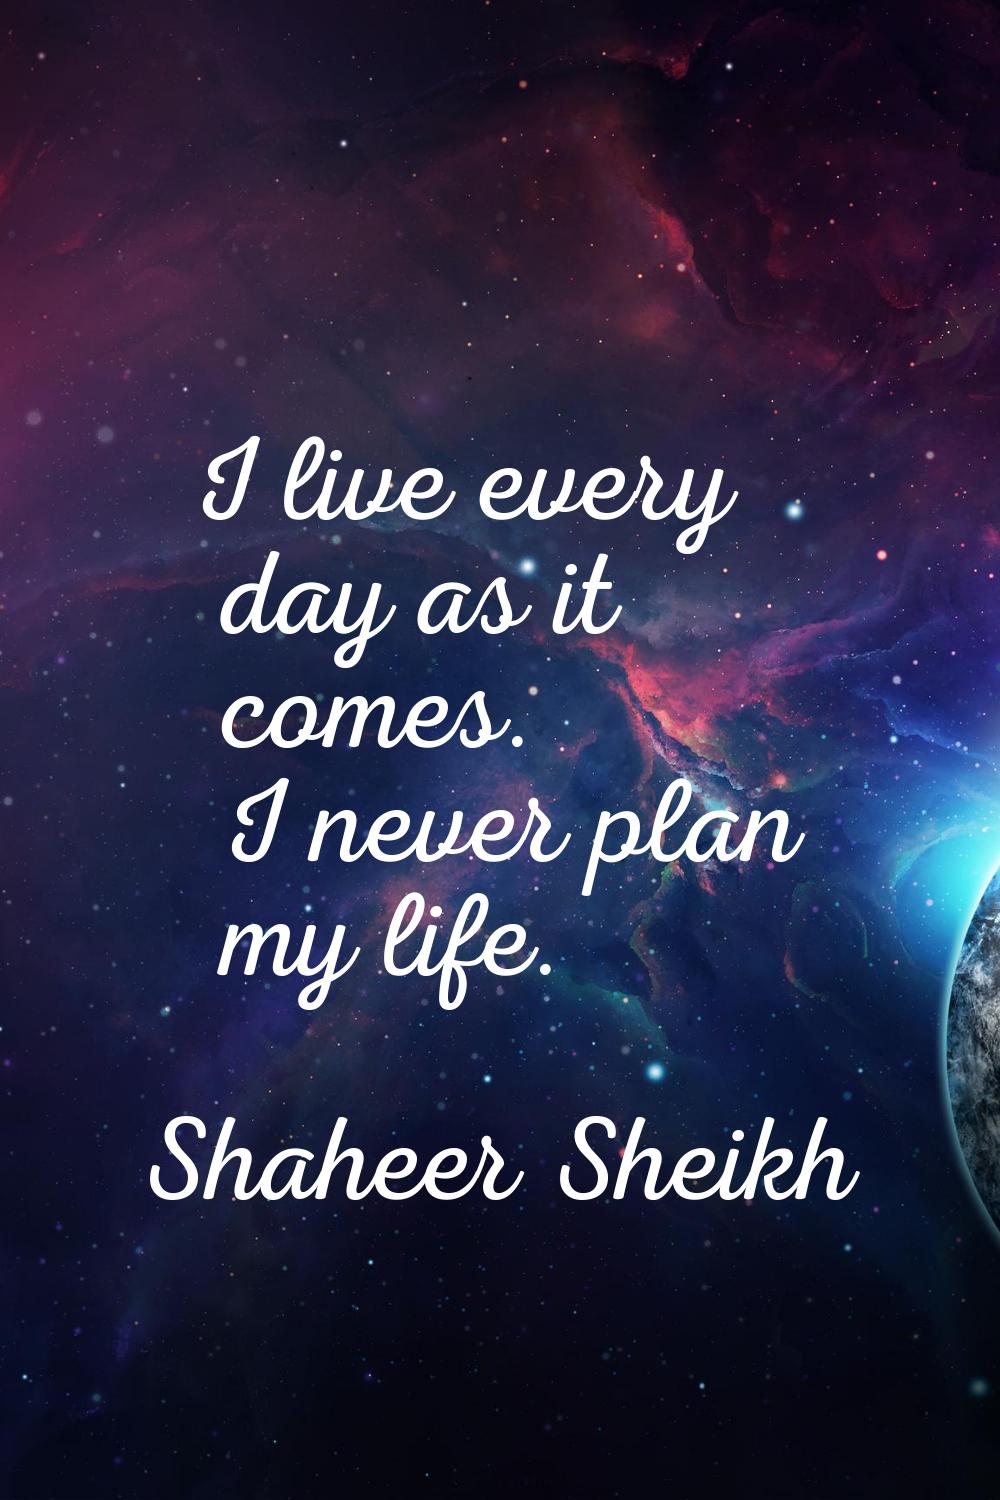 I live every day as it comes. I never plan my life.